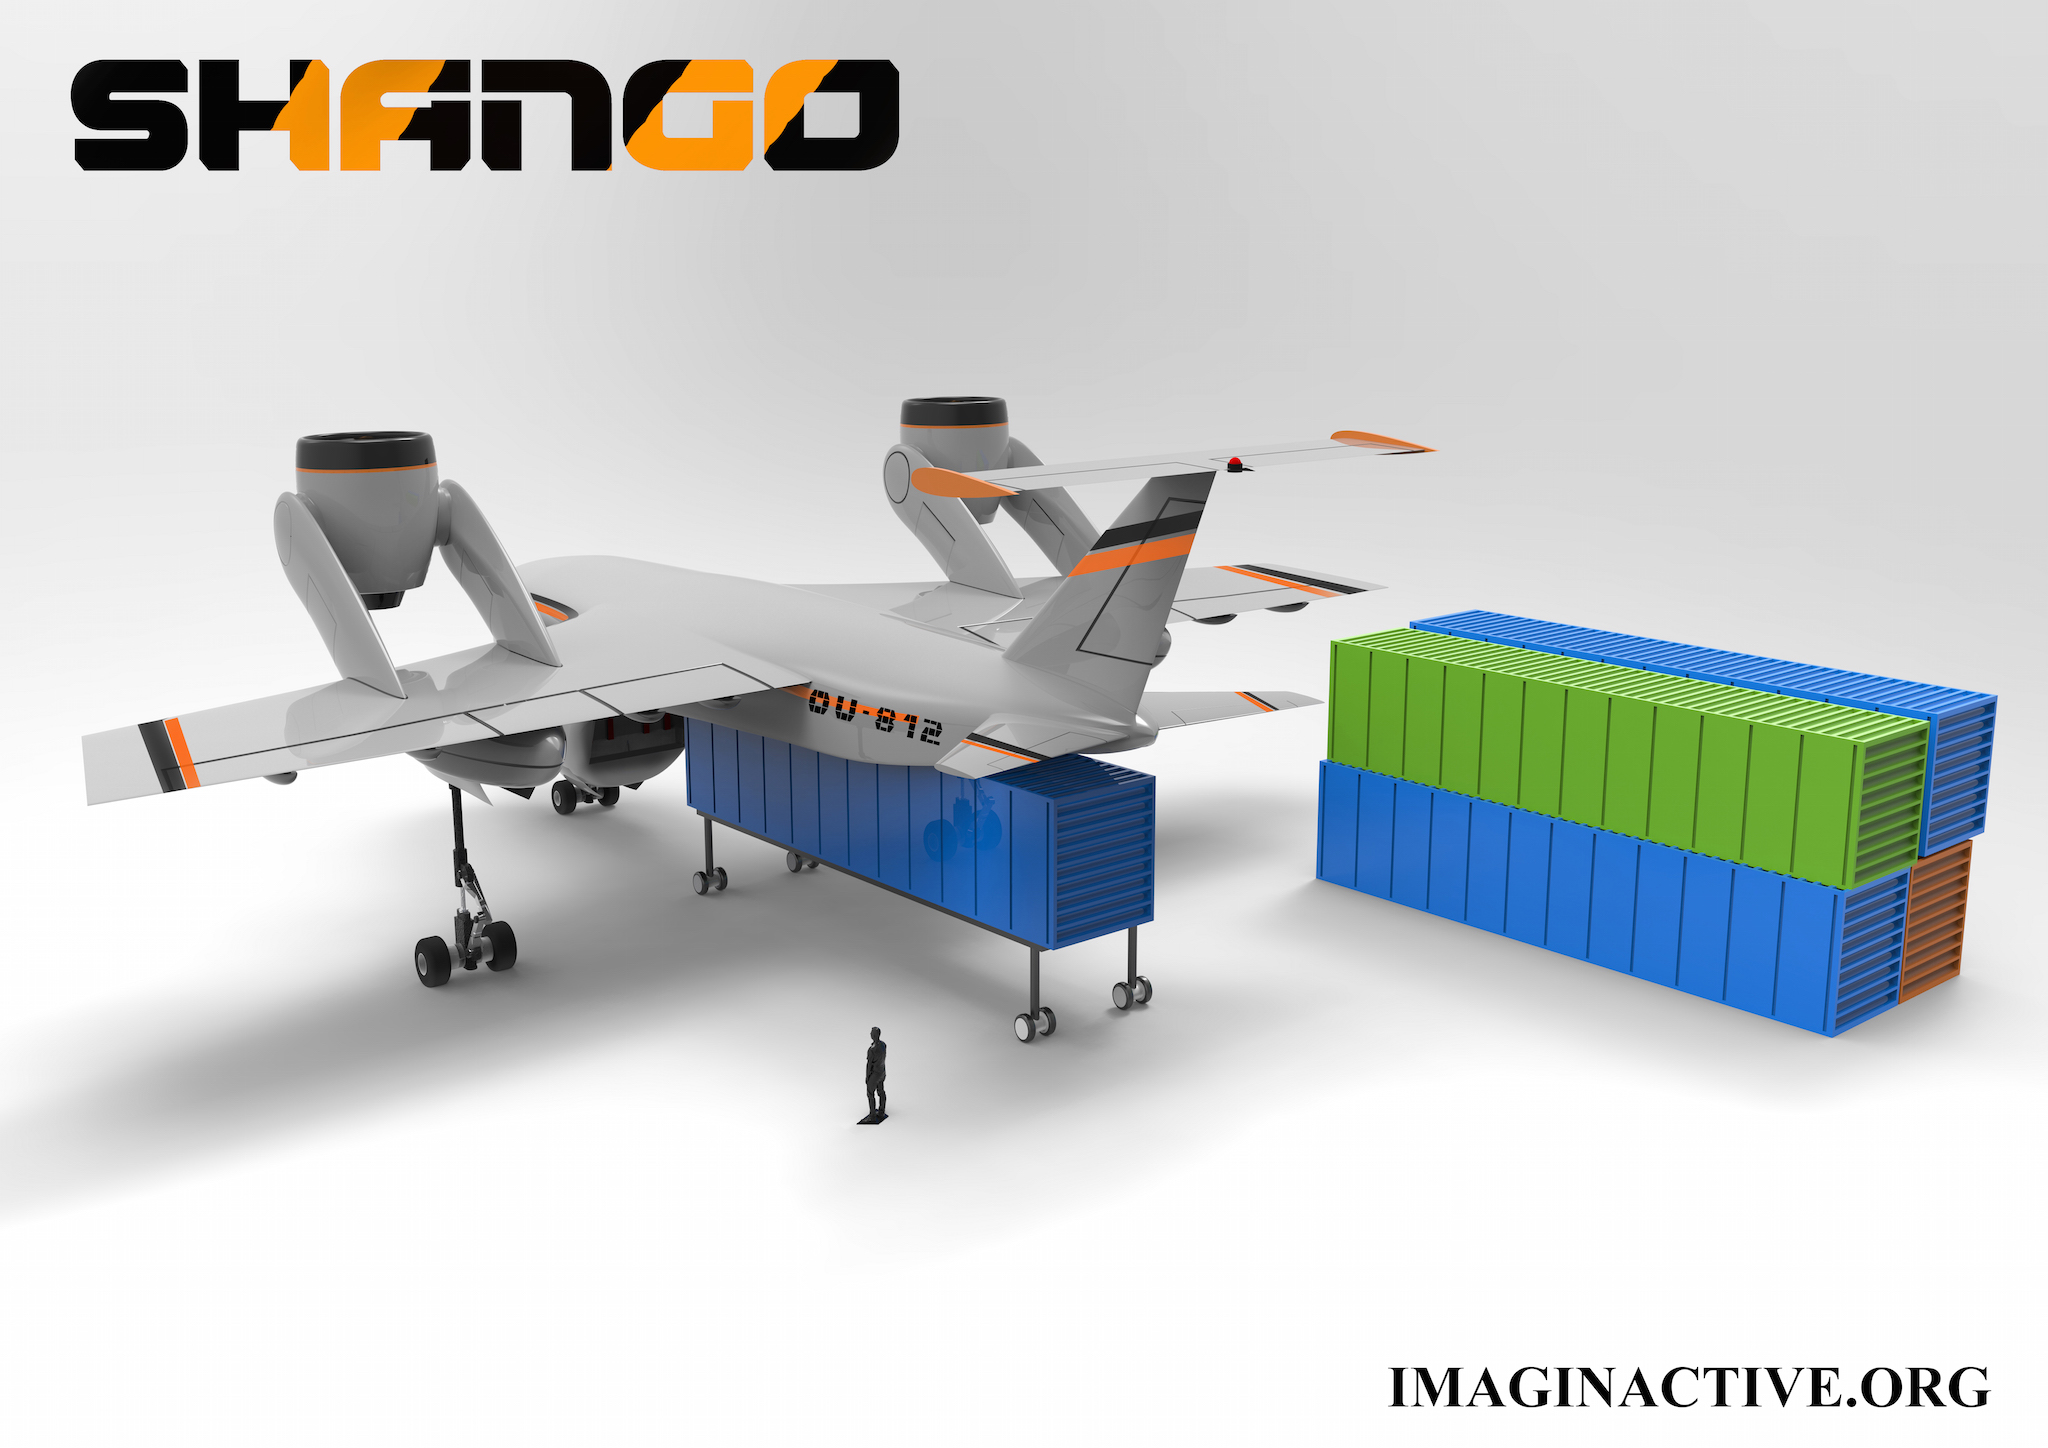 Canadian Designer Imagines Drones That Carry Shipping Containers